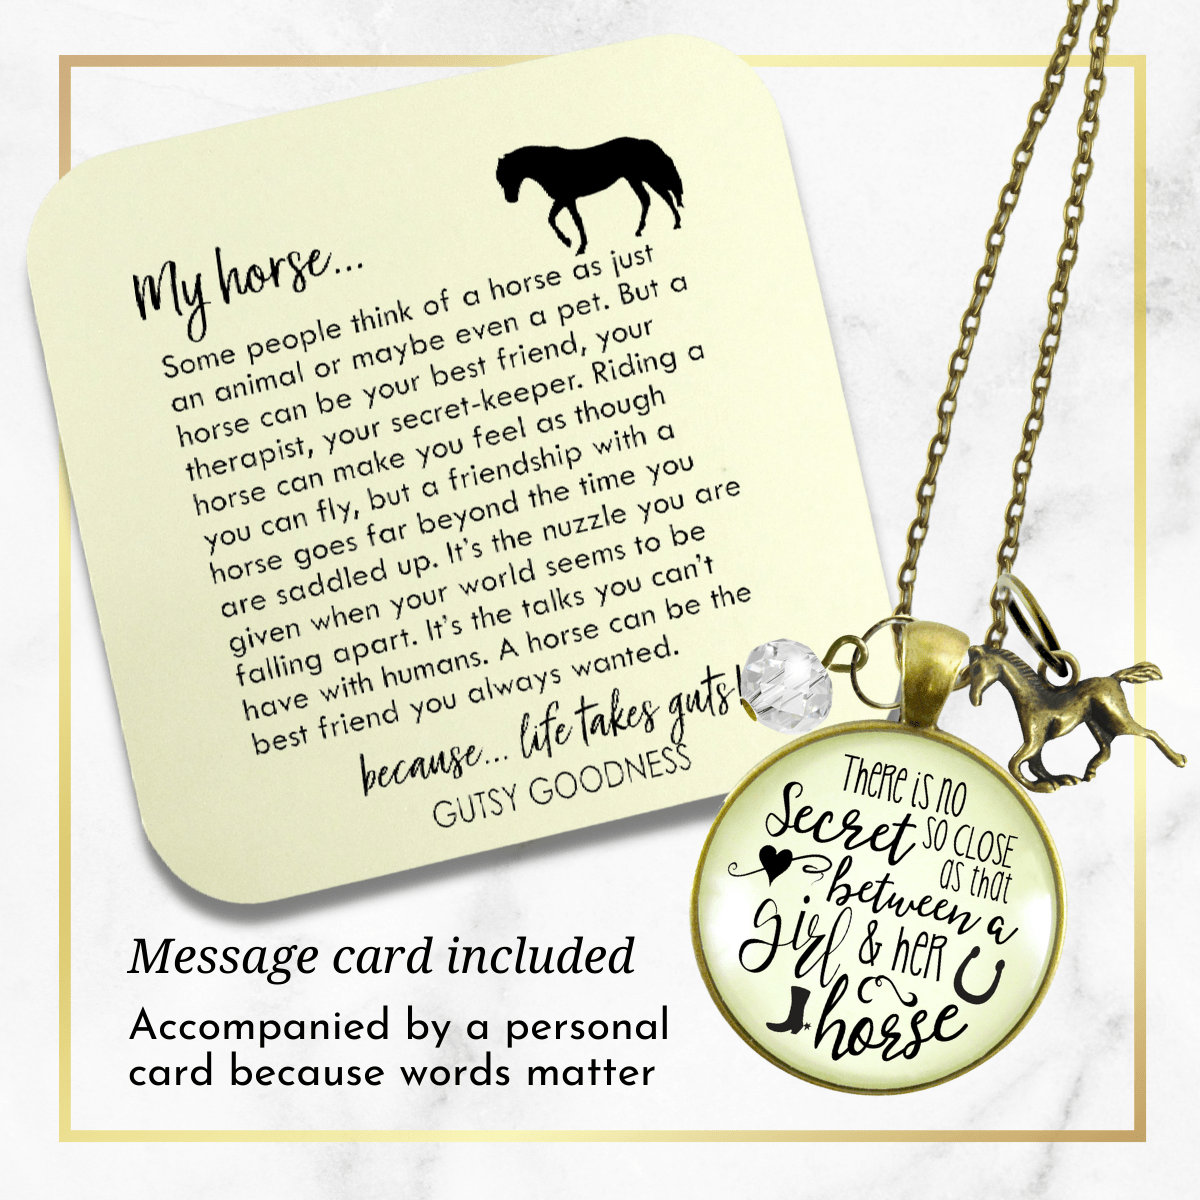 Gutsy Goodness Horse Necklace Equestrian Country Theme Quote Jewelry Galloping Charm - Gutsy Goodness Handmade Jewelry;Horse Necklace Equestrian Country Theme Quote Jewelry Galloping Charm - Gutsy Goodness Handmade Jewelry Gifts